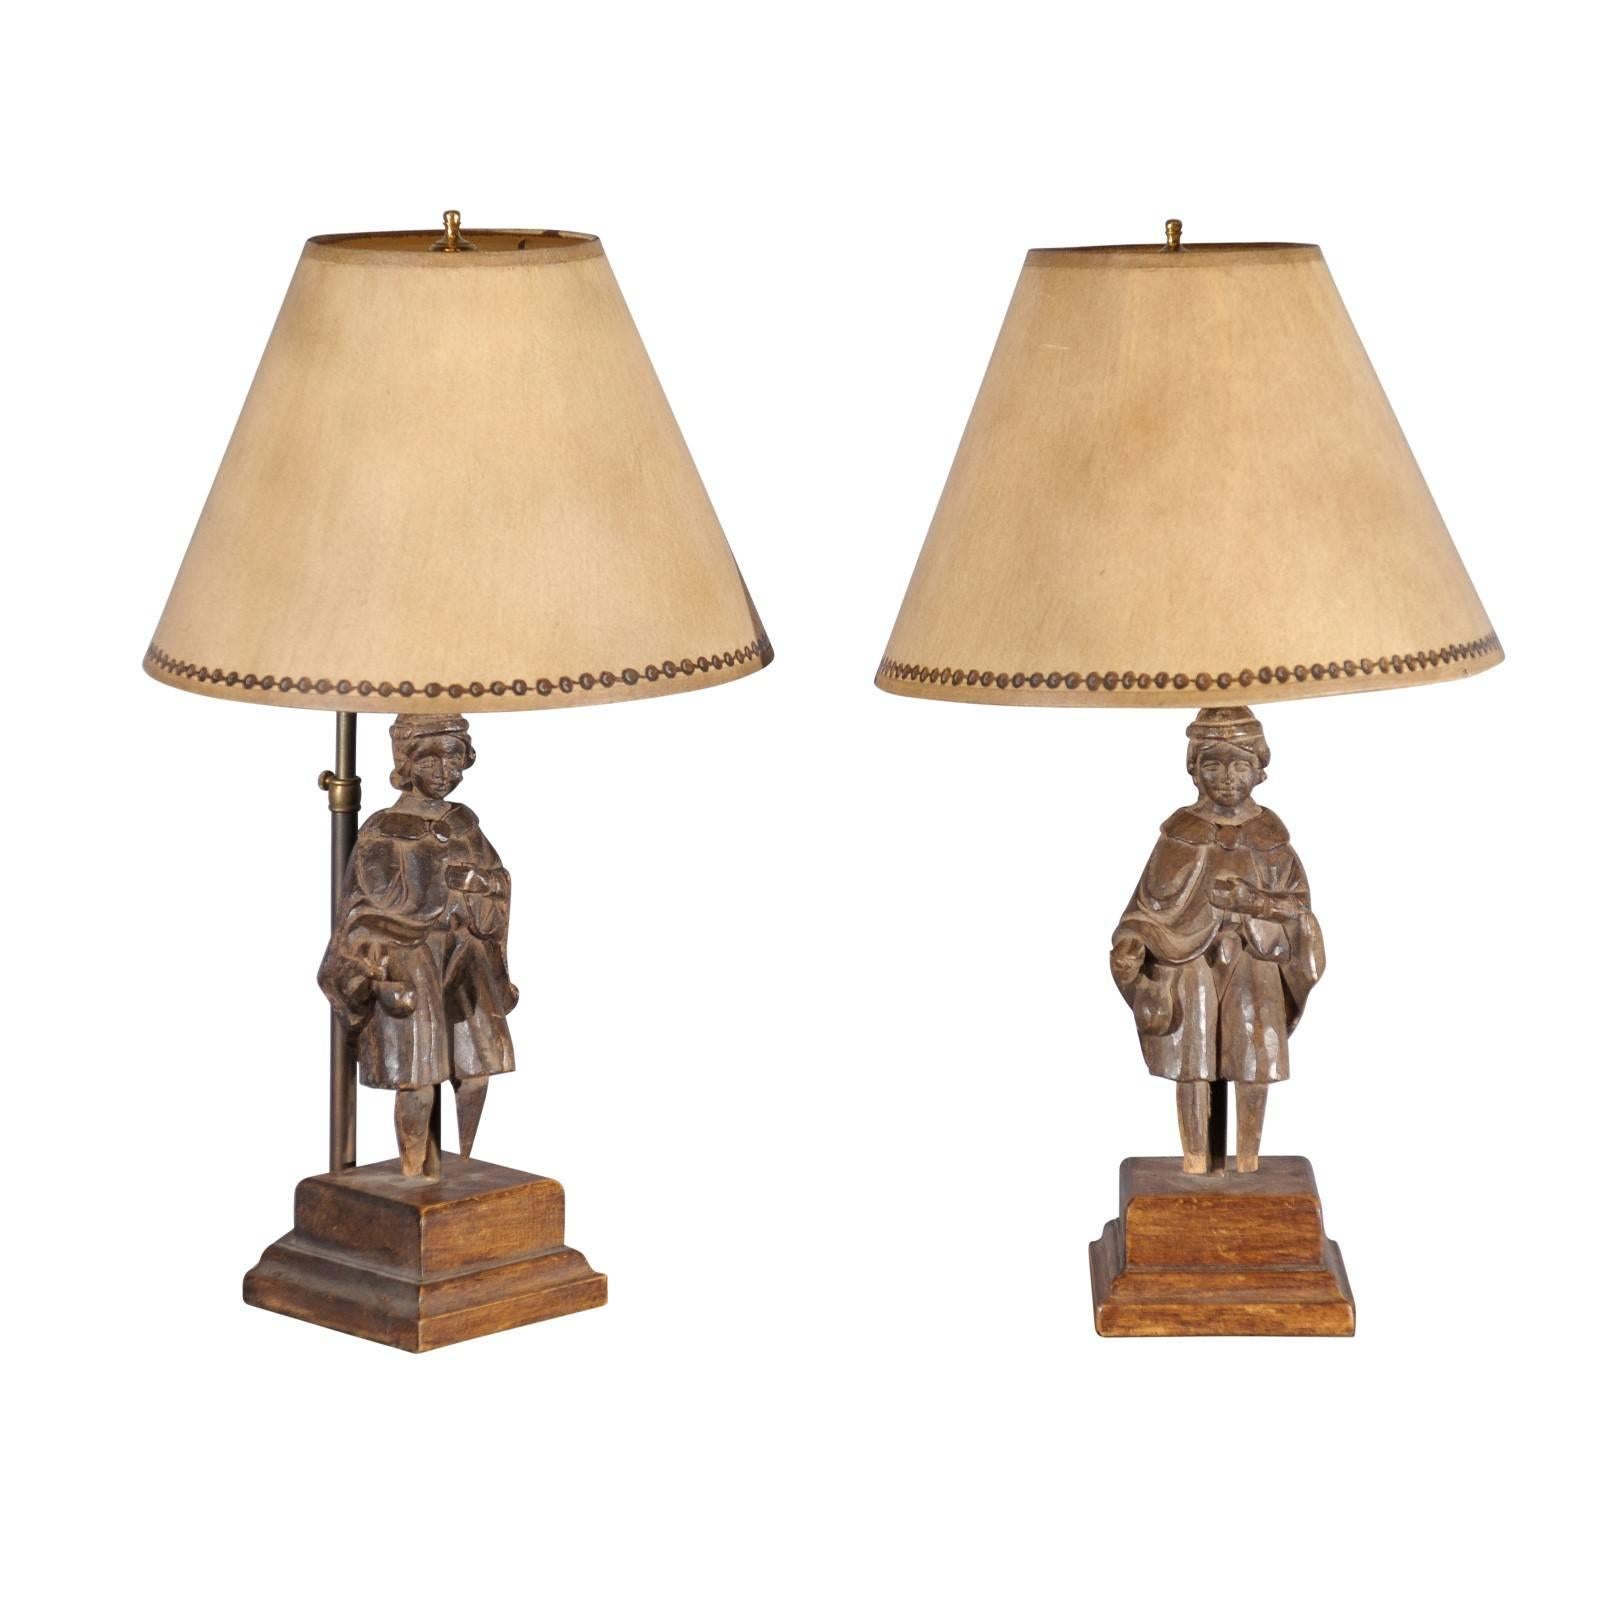 Pair of Carved Oak 19th Century Figural Fragments Mounted as Table Lamps with Sh